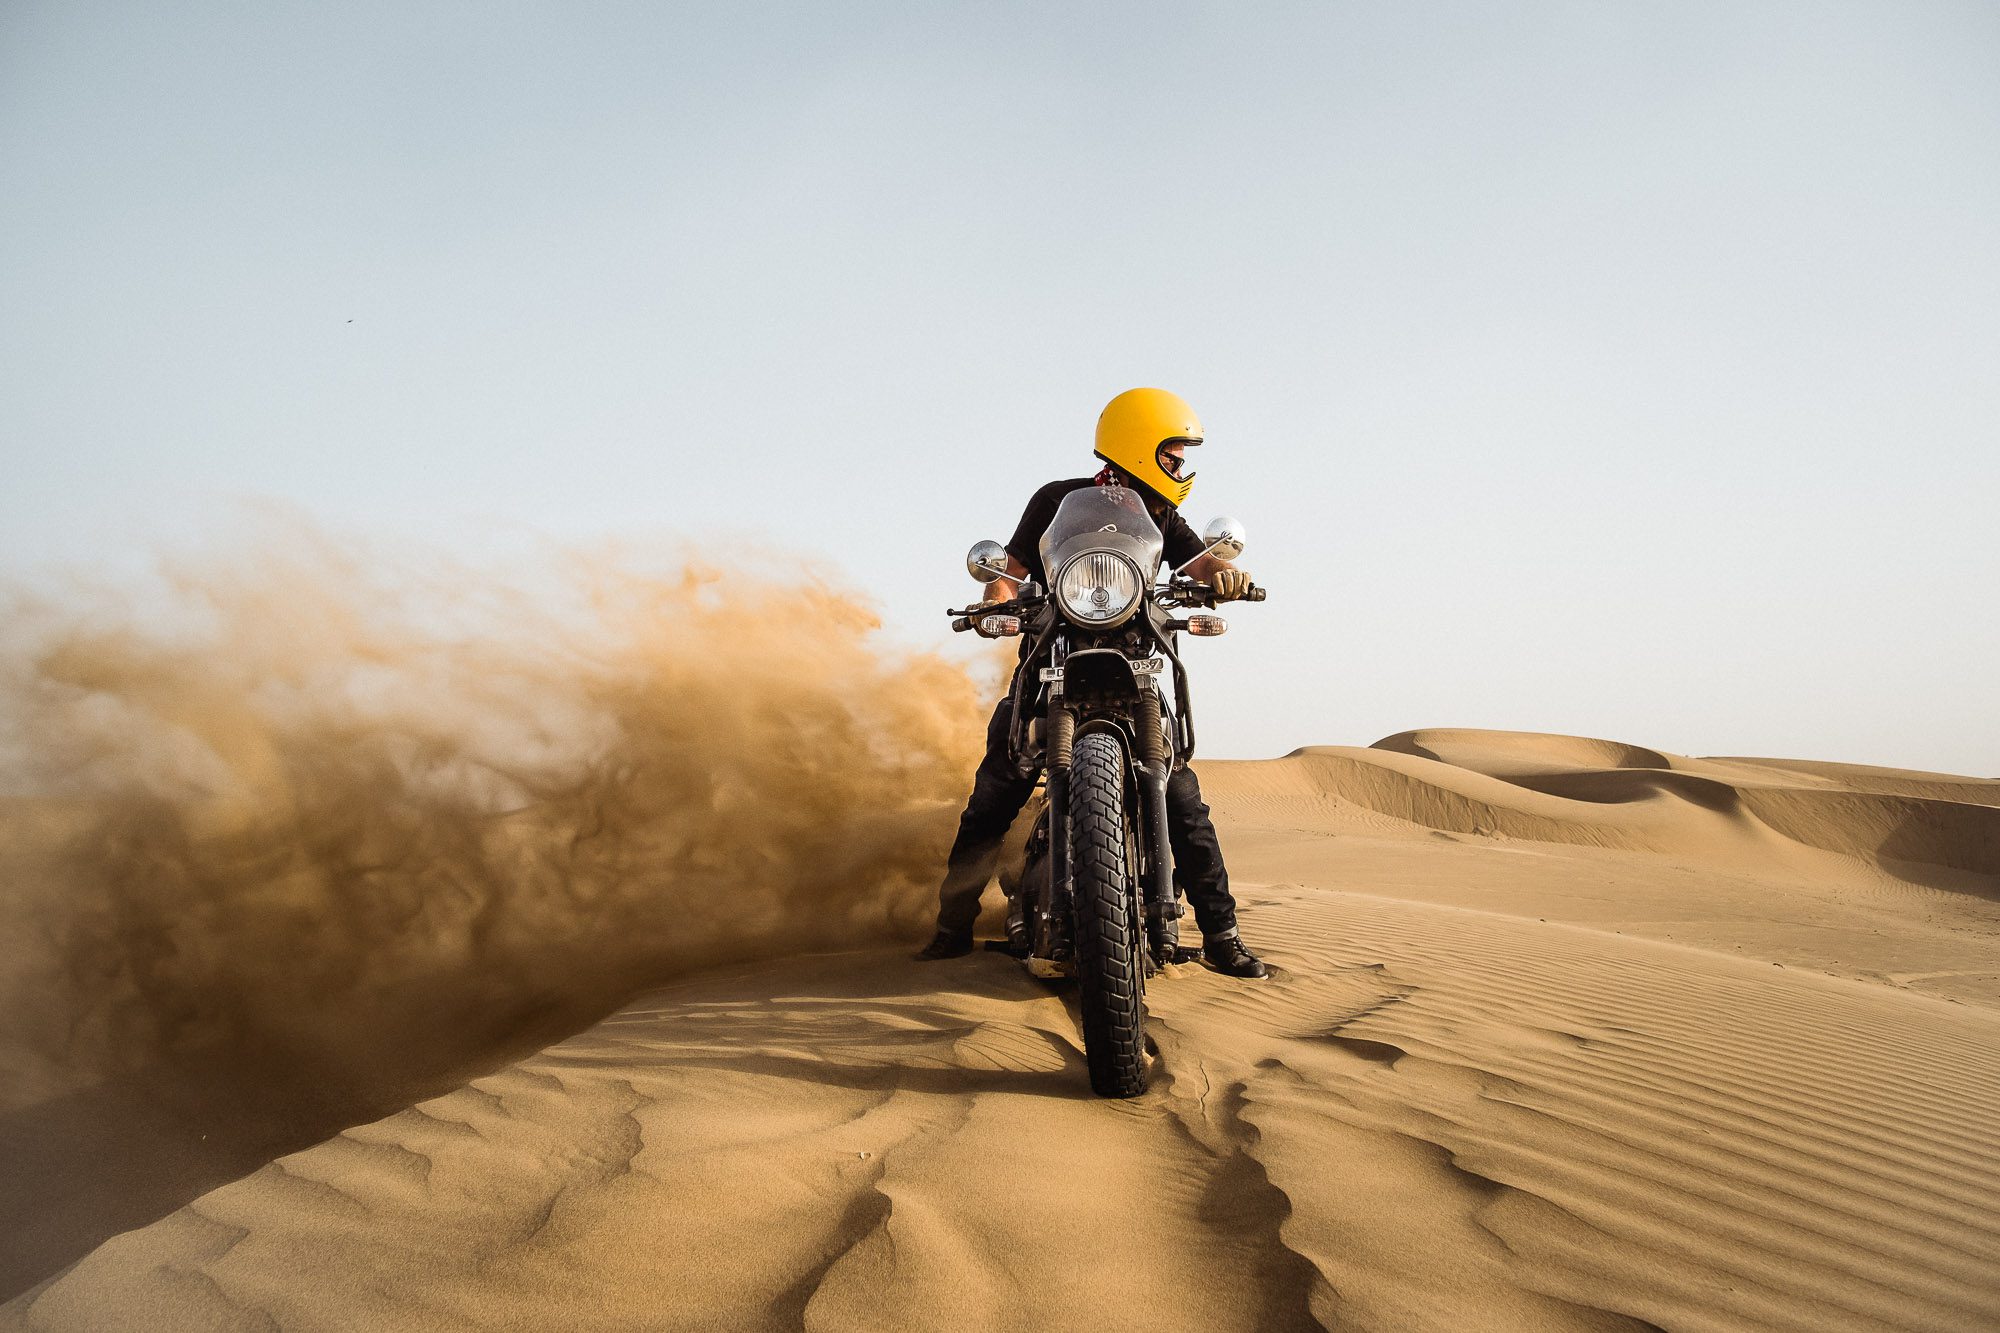 A royal Enfield rider creates a 'rooster tail' in the Rajasthan desert